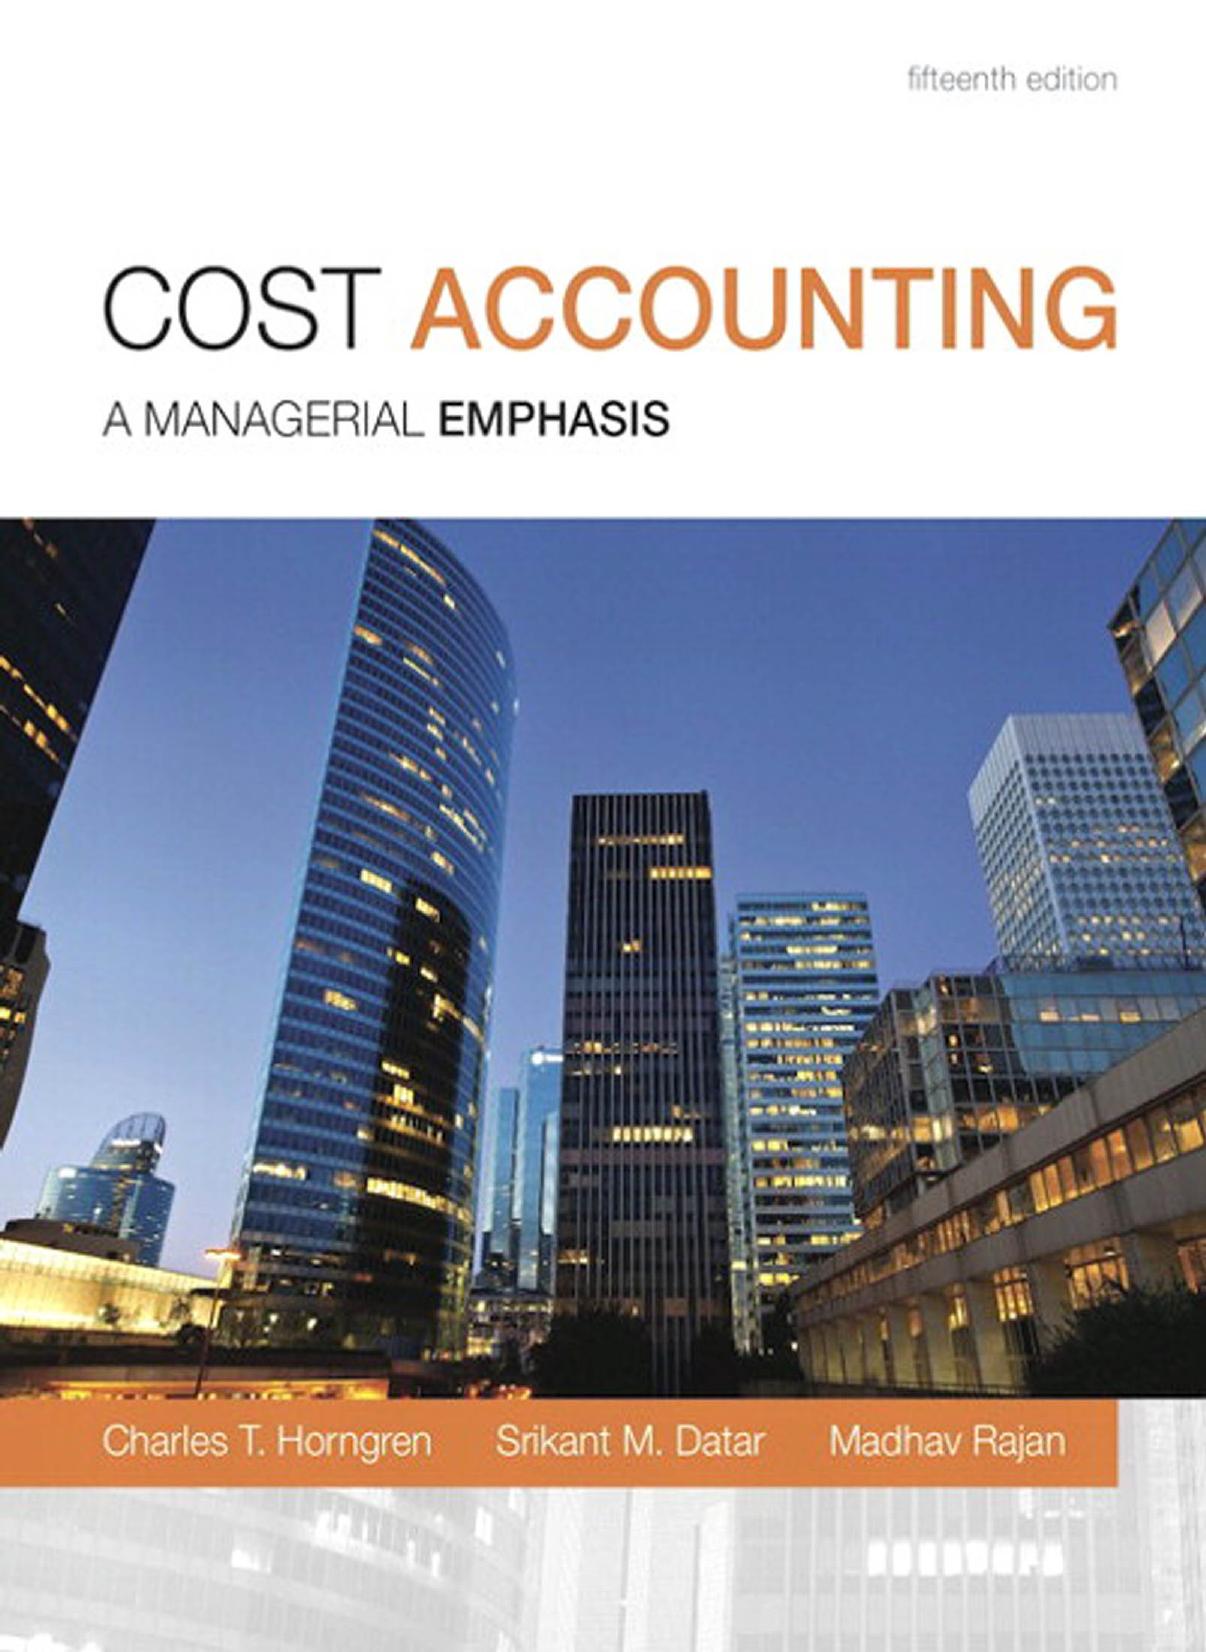 Cost Accounting A Managerial Emphasis, 15th Edition - Wei Zhi (1).jpg